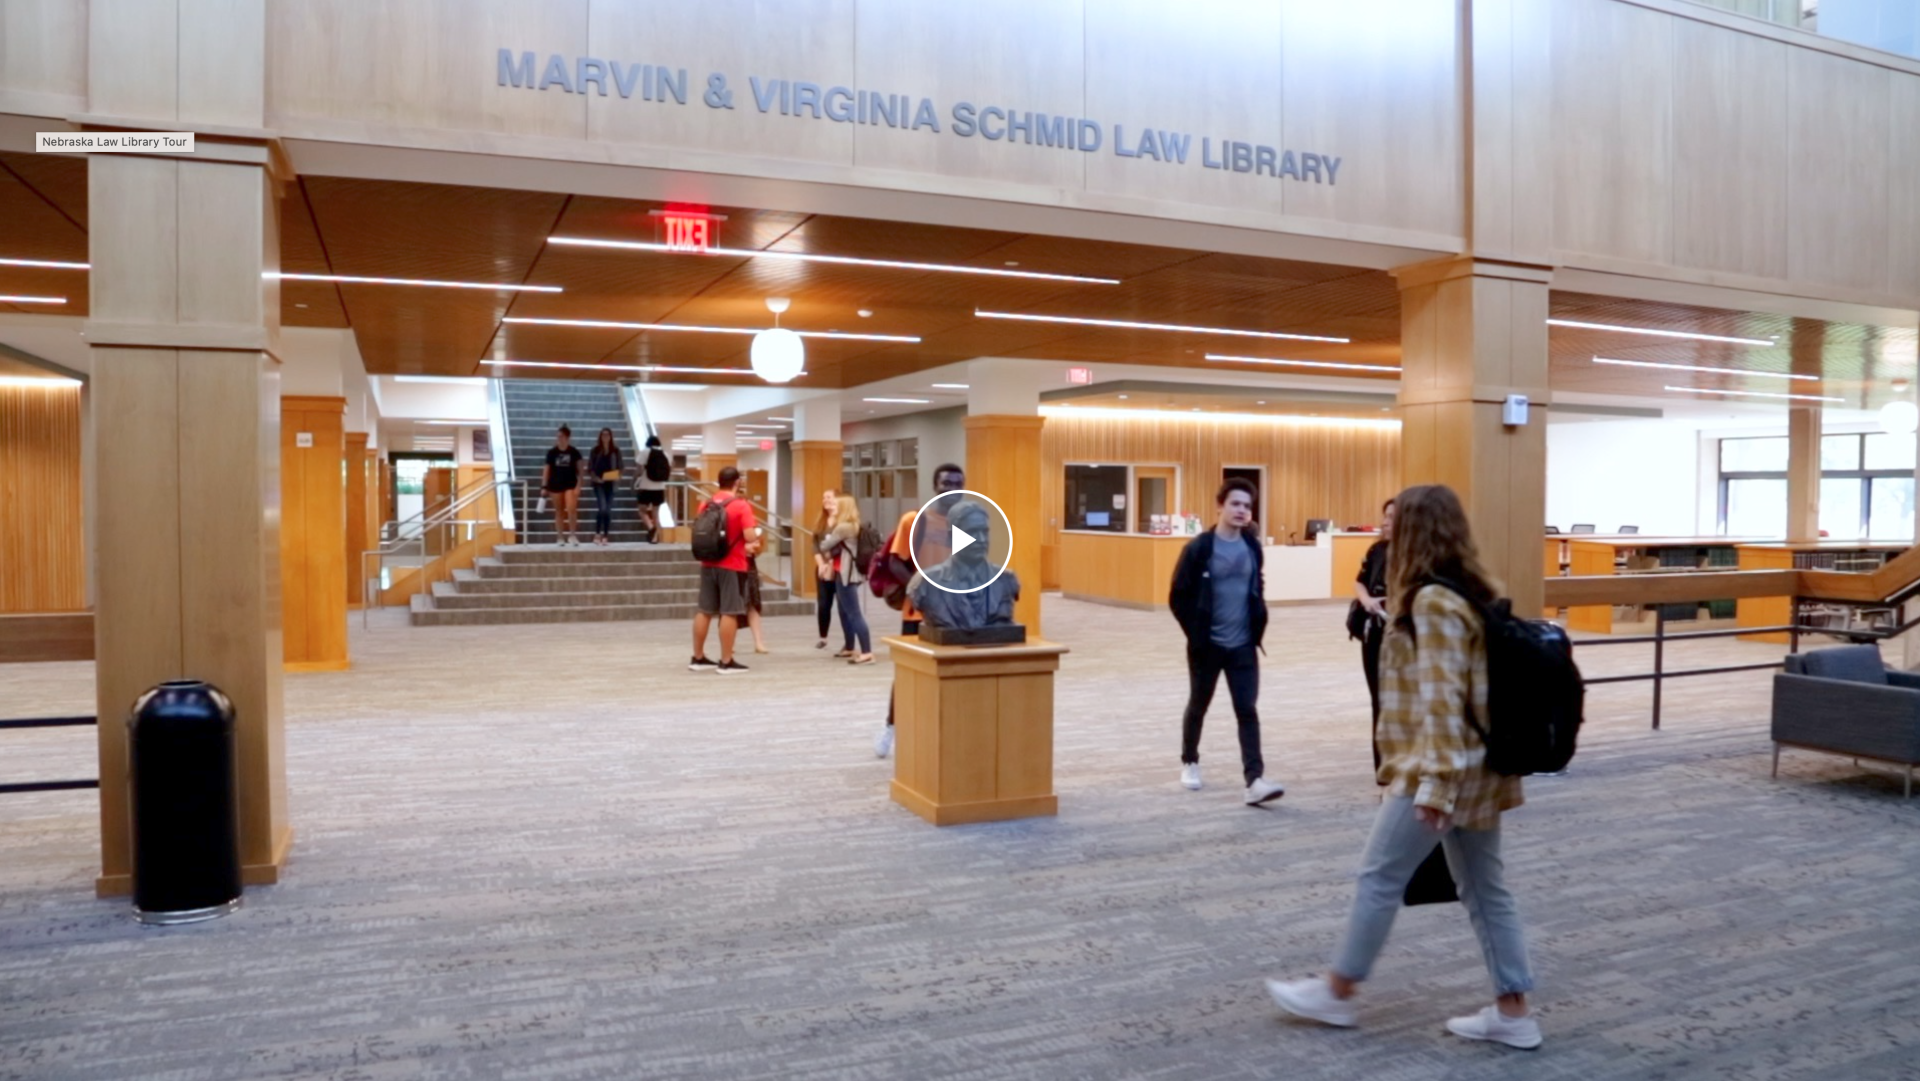 Videos screenshot of students walking through the library lobby